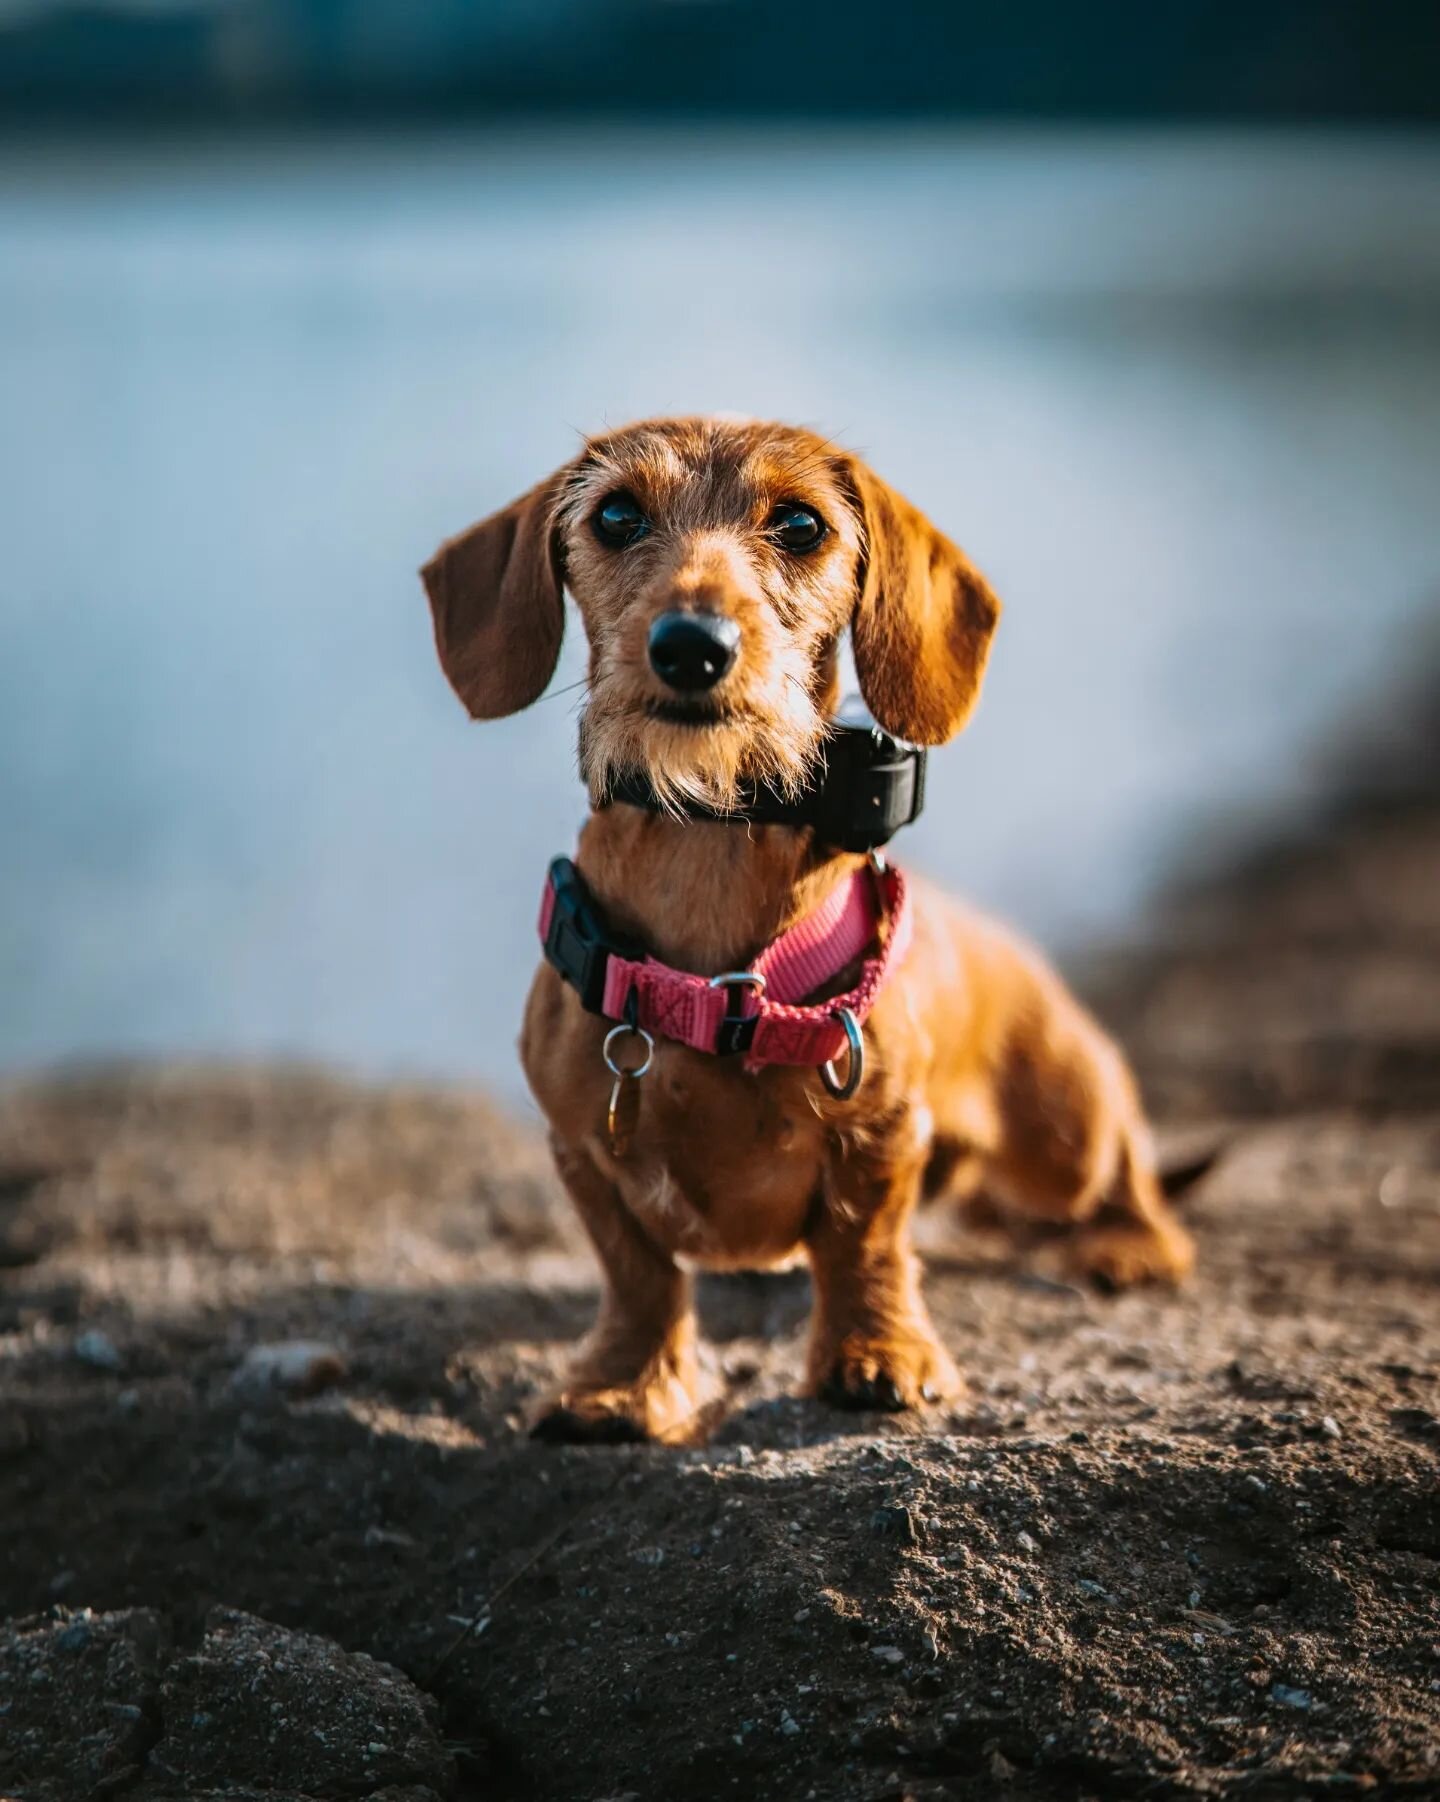 Little dogs can do big things!
.
Reece is a wirehaired miniature daschund that just finished her custom board and train. Her main focus is to recall no matter the circumstances! Reece comes from the eastern Lake Tahoe area, a very spacious and wild p